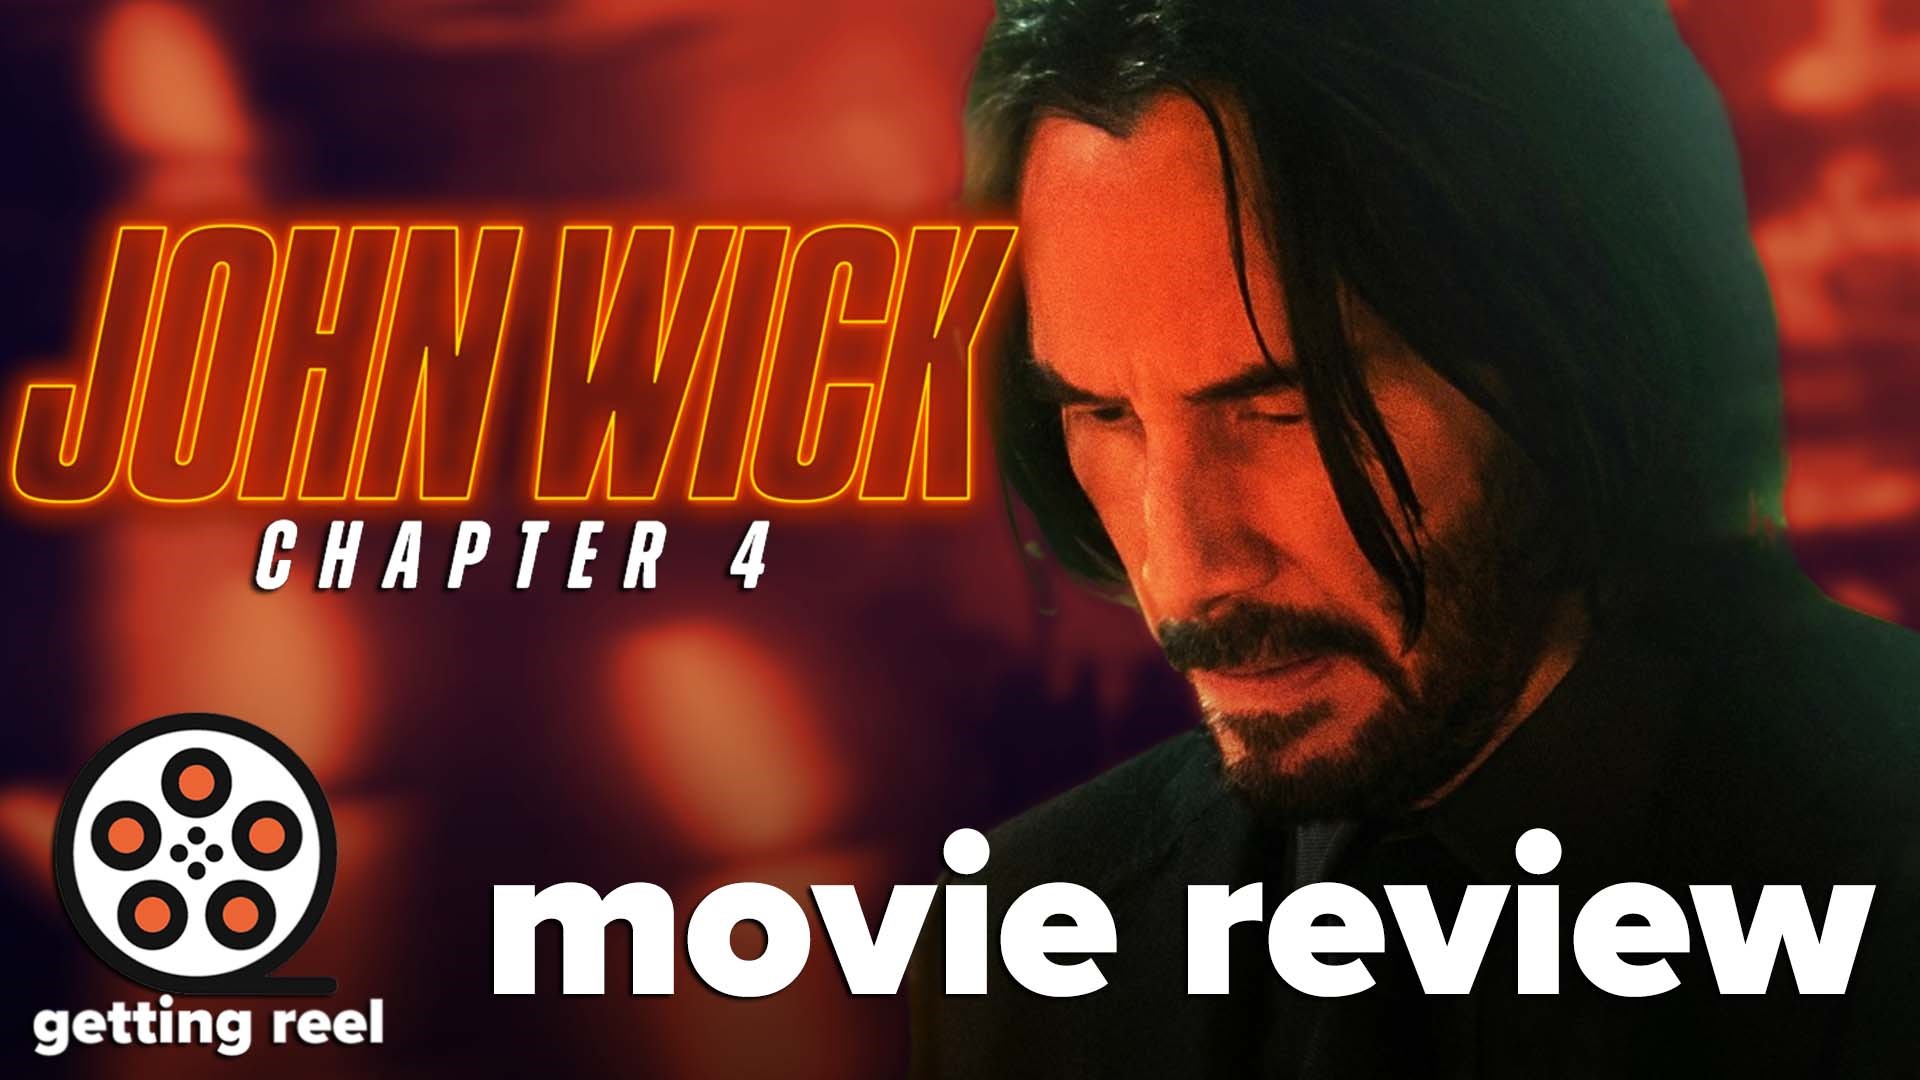 If Face/Off, The Warriors, Mission: Impossible, and Battleship Potemkin fused together you would get John Wick: Chapter 4.